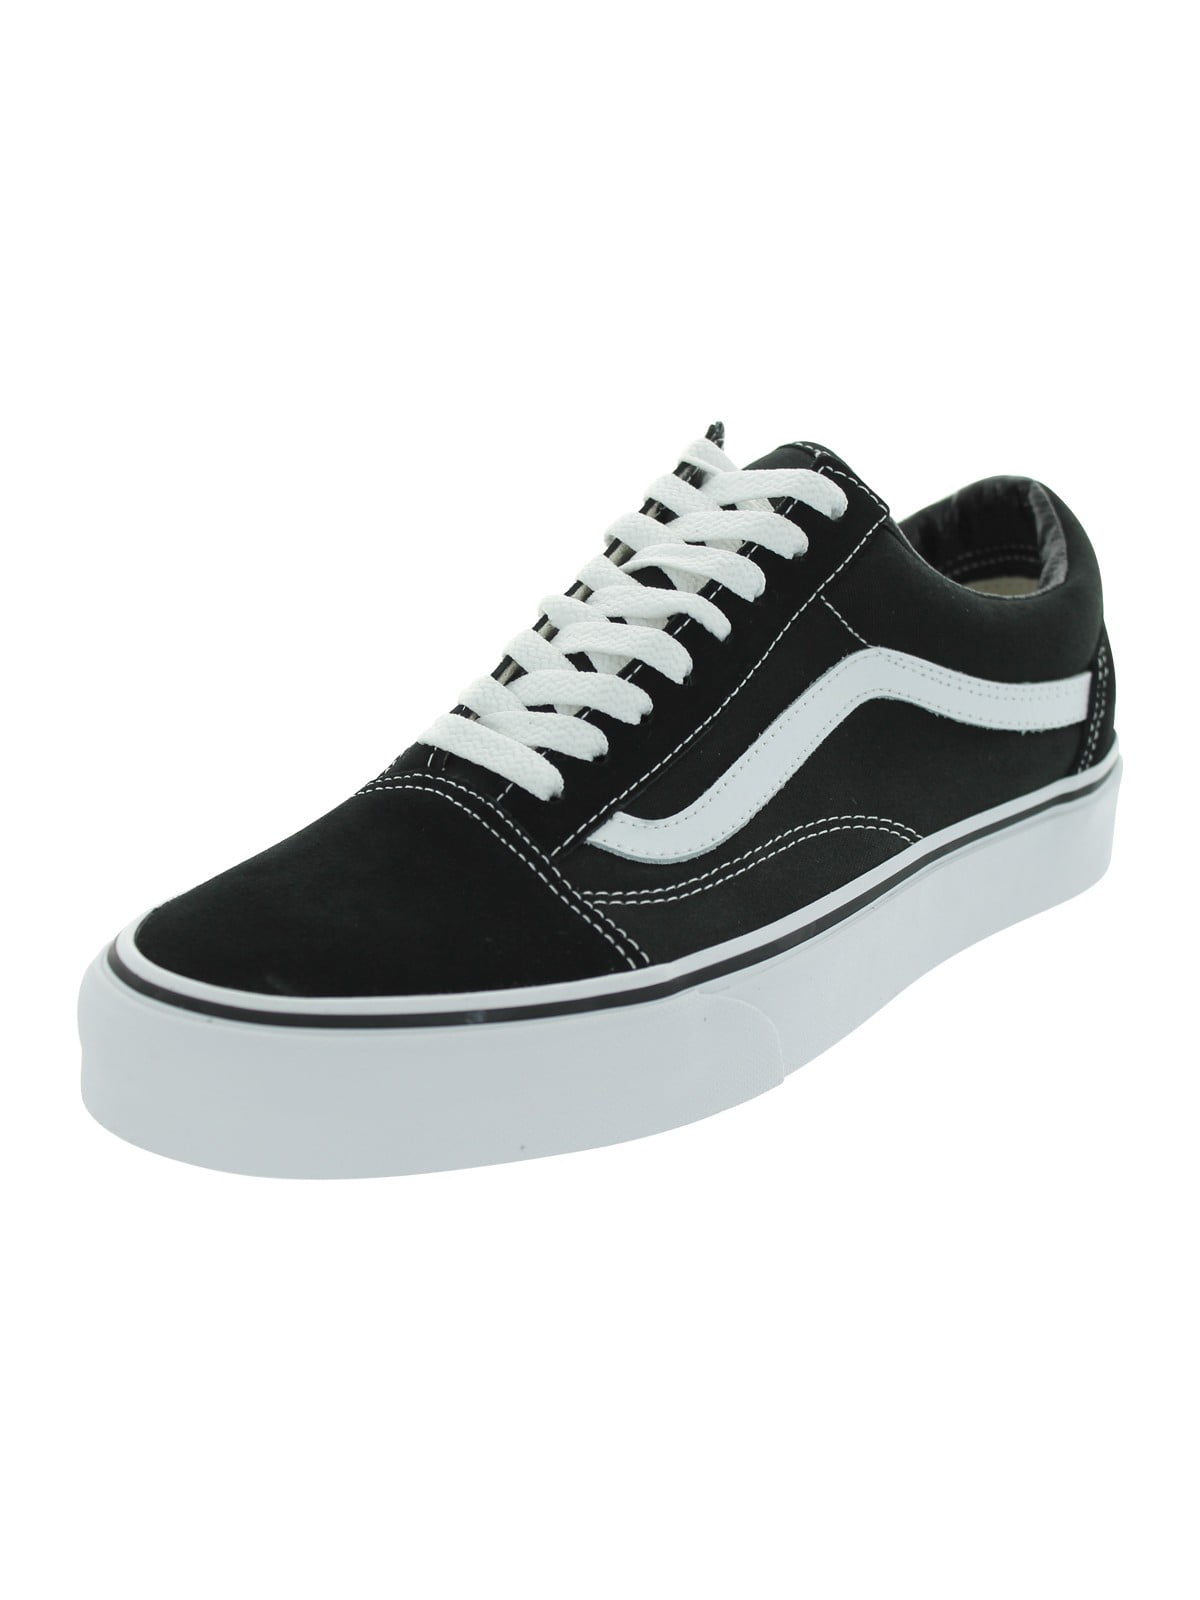 does walmart sell vans shoes